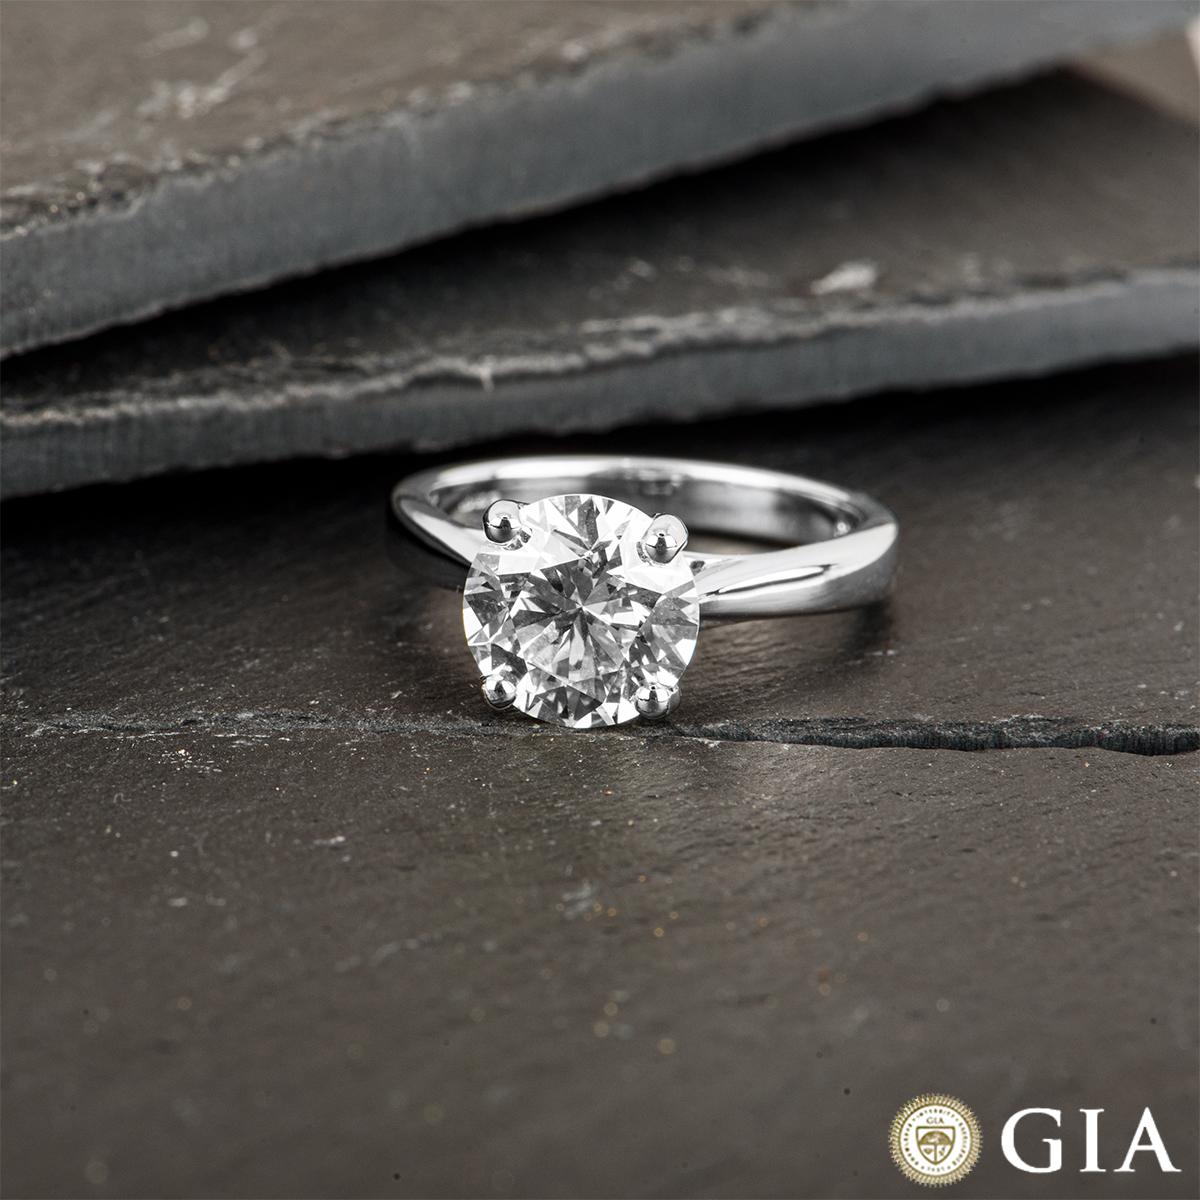 GIA Certified White Gold Round Brilliant Diamond Solitaire Ring 2.71ct M/VS2 In New Condition For Sale In London, GB